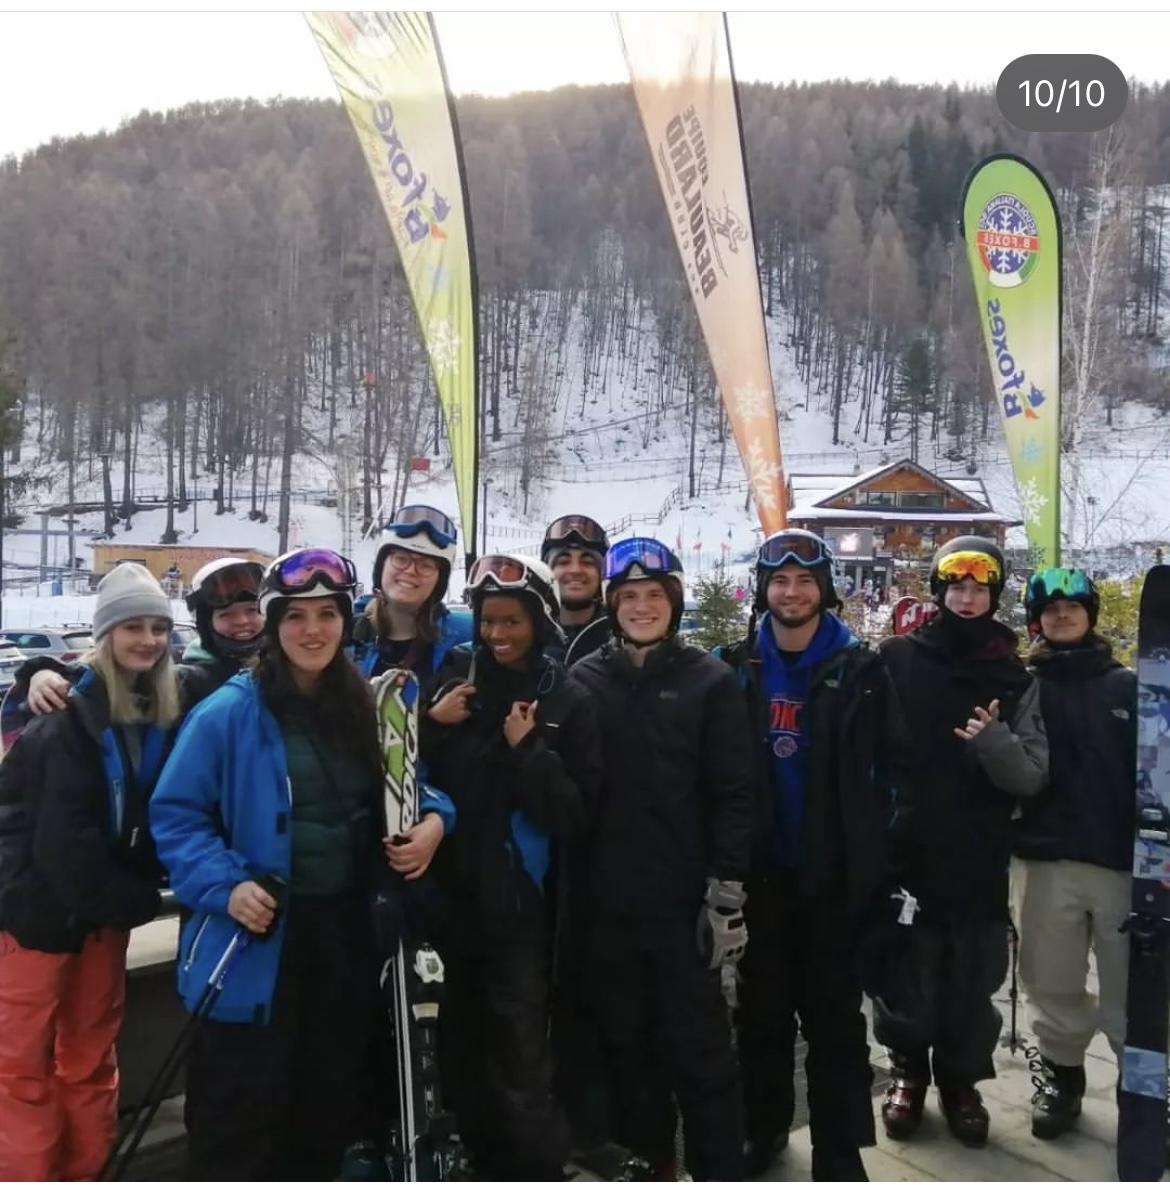 The whole group at Bardoneccia, the local skiing mountain 